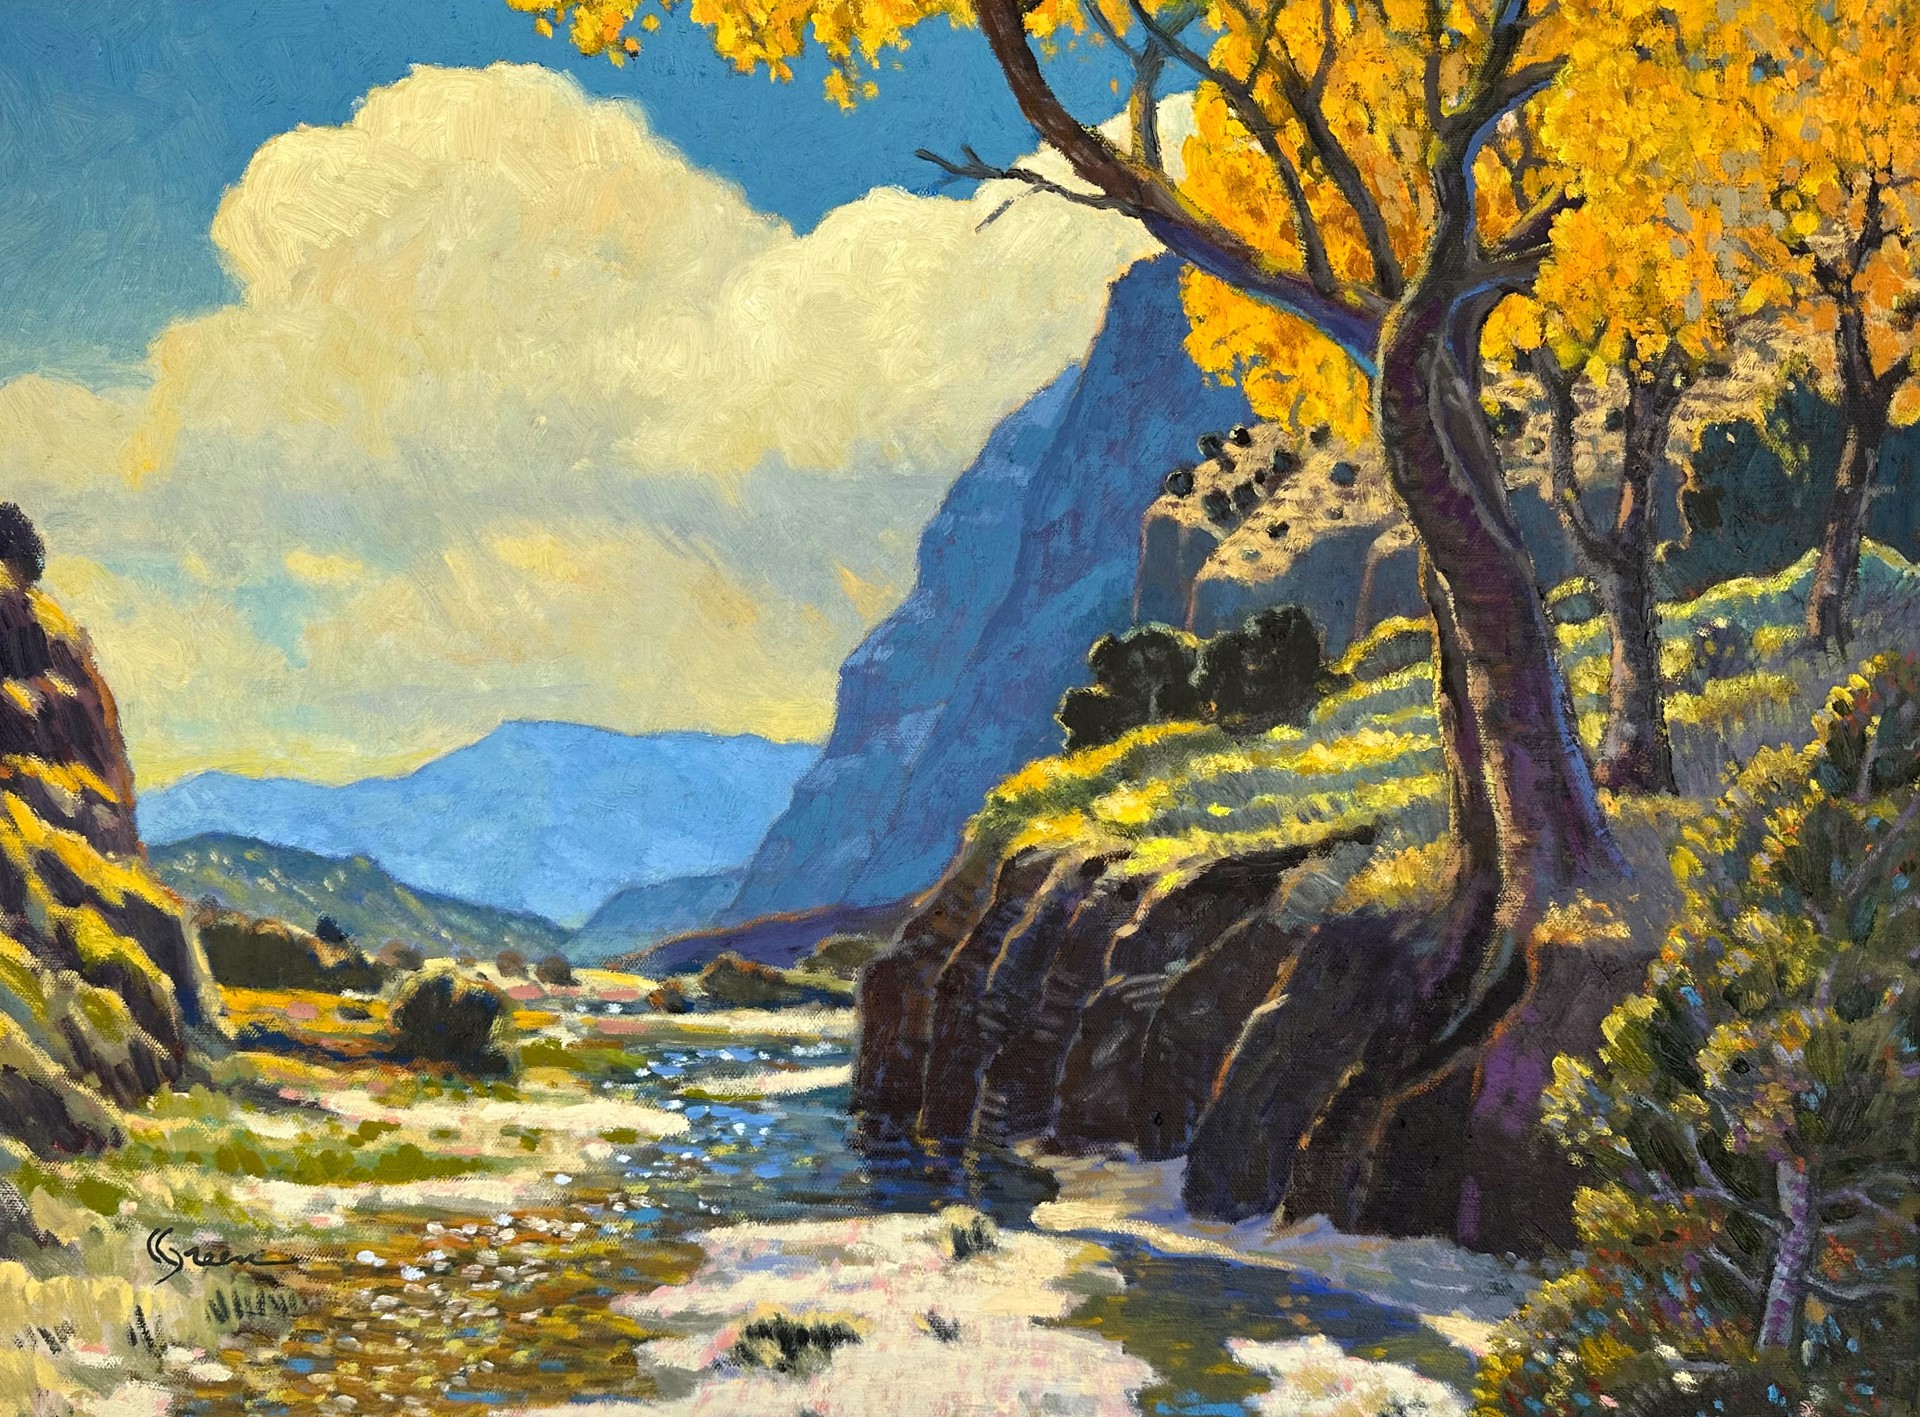 Solitude of the Canyon by Kenneth Green